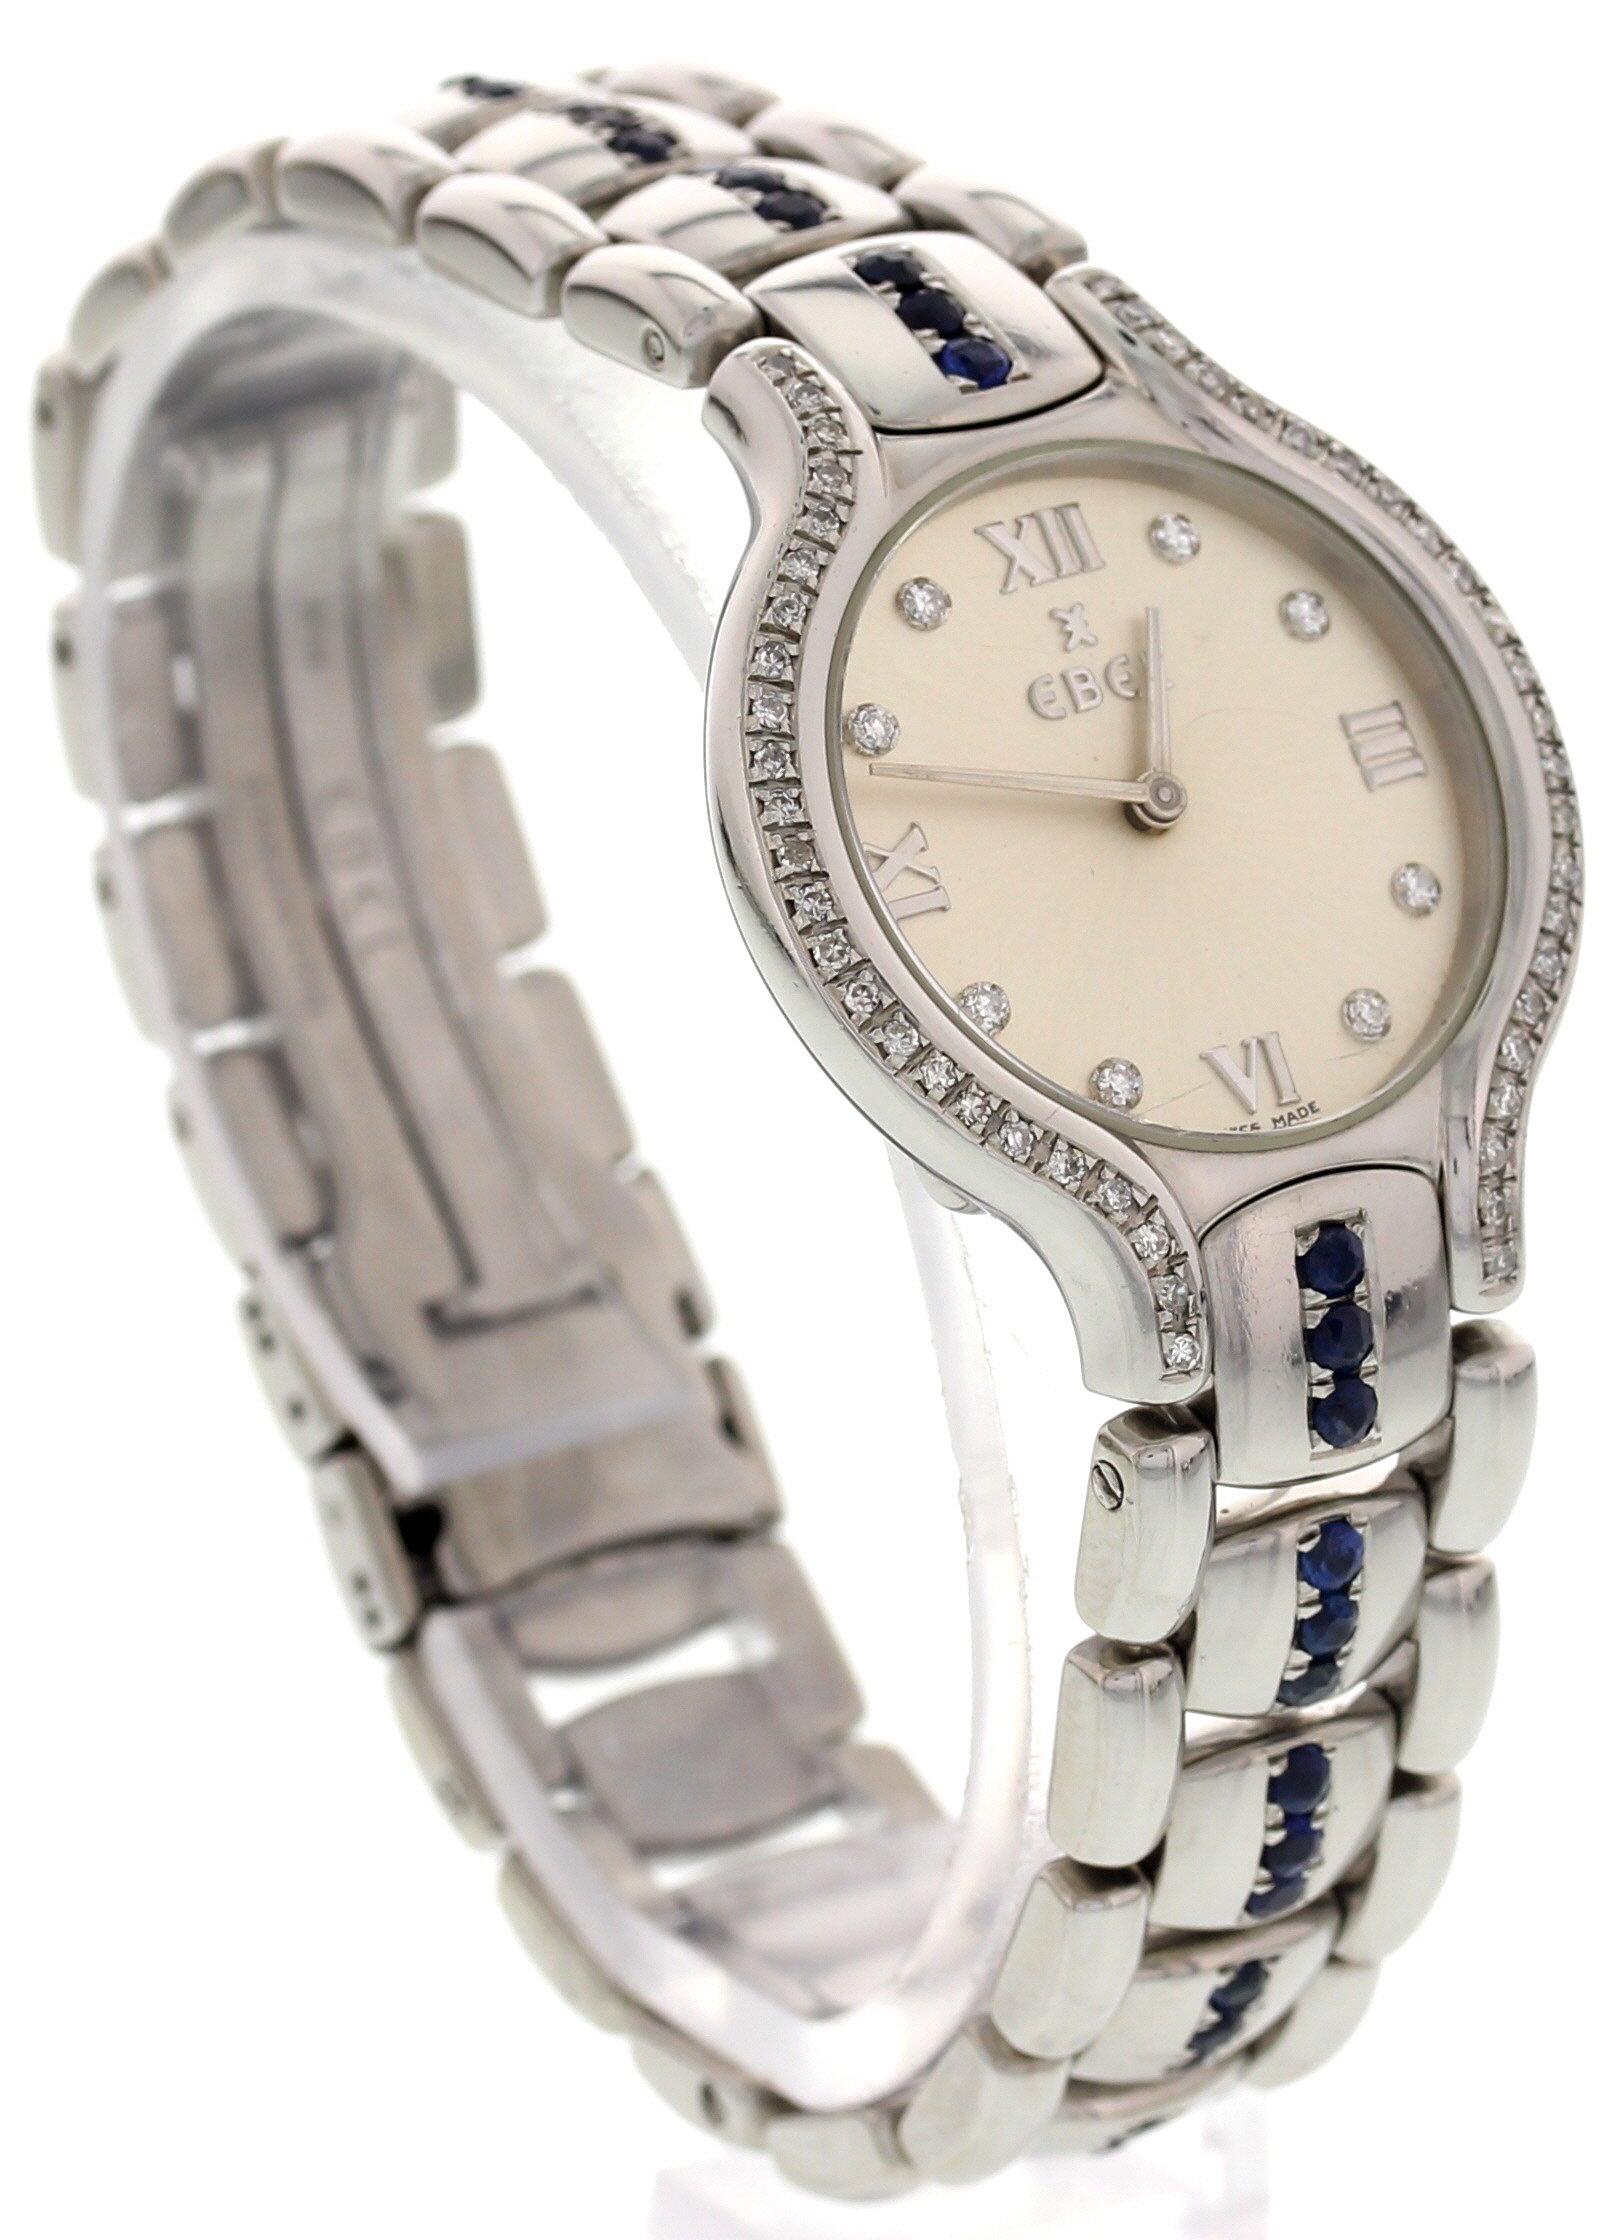 Stainless steel 26 mm case. Stainless steel bracelet with sapphires. Hidden folding clasp. Round cut diamonds around the stainless steel bezel. Silver dial with diamonds and silver roman numeral markers at the 12, 3, 6, and 9 hours. Quartz movement.
